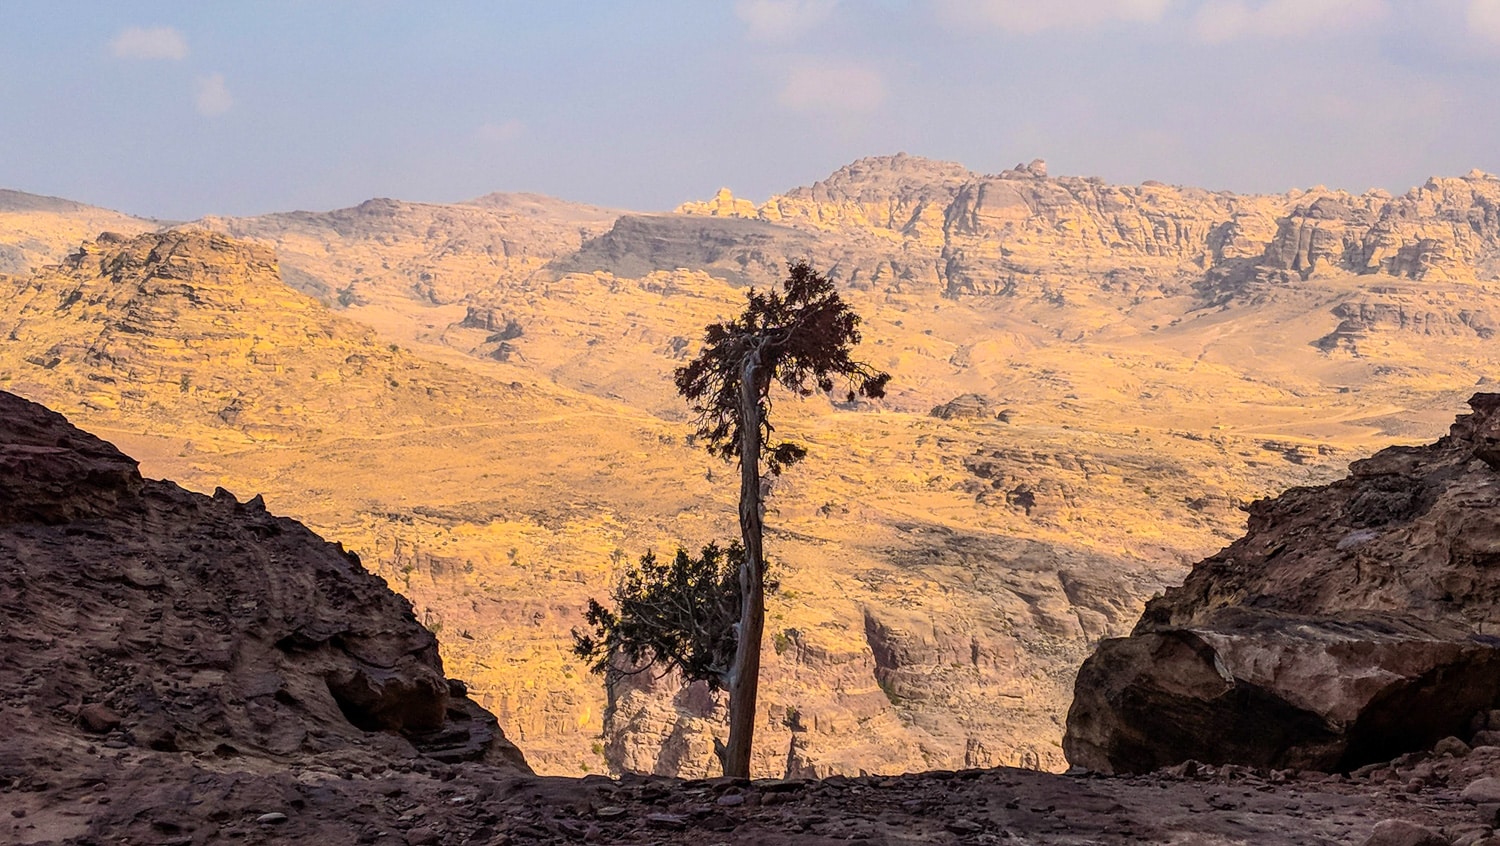 A lonely tree in front of wide valley near Petra Jordan